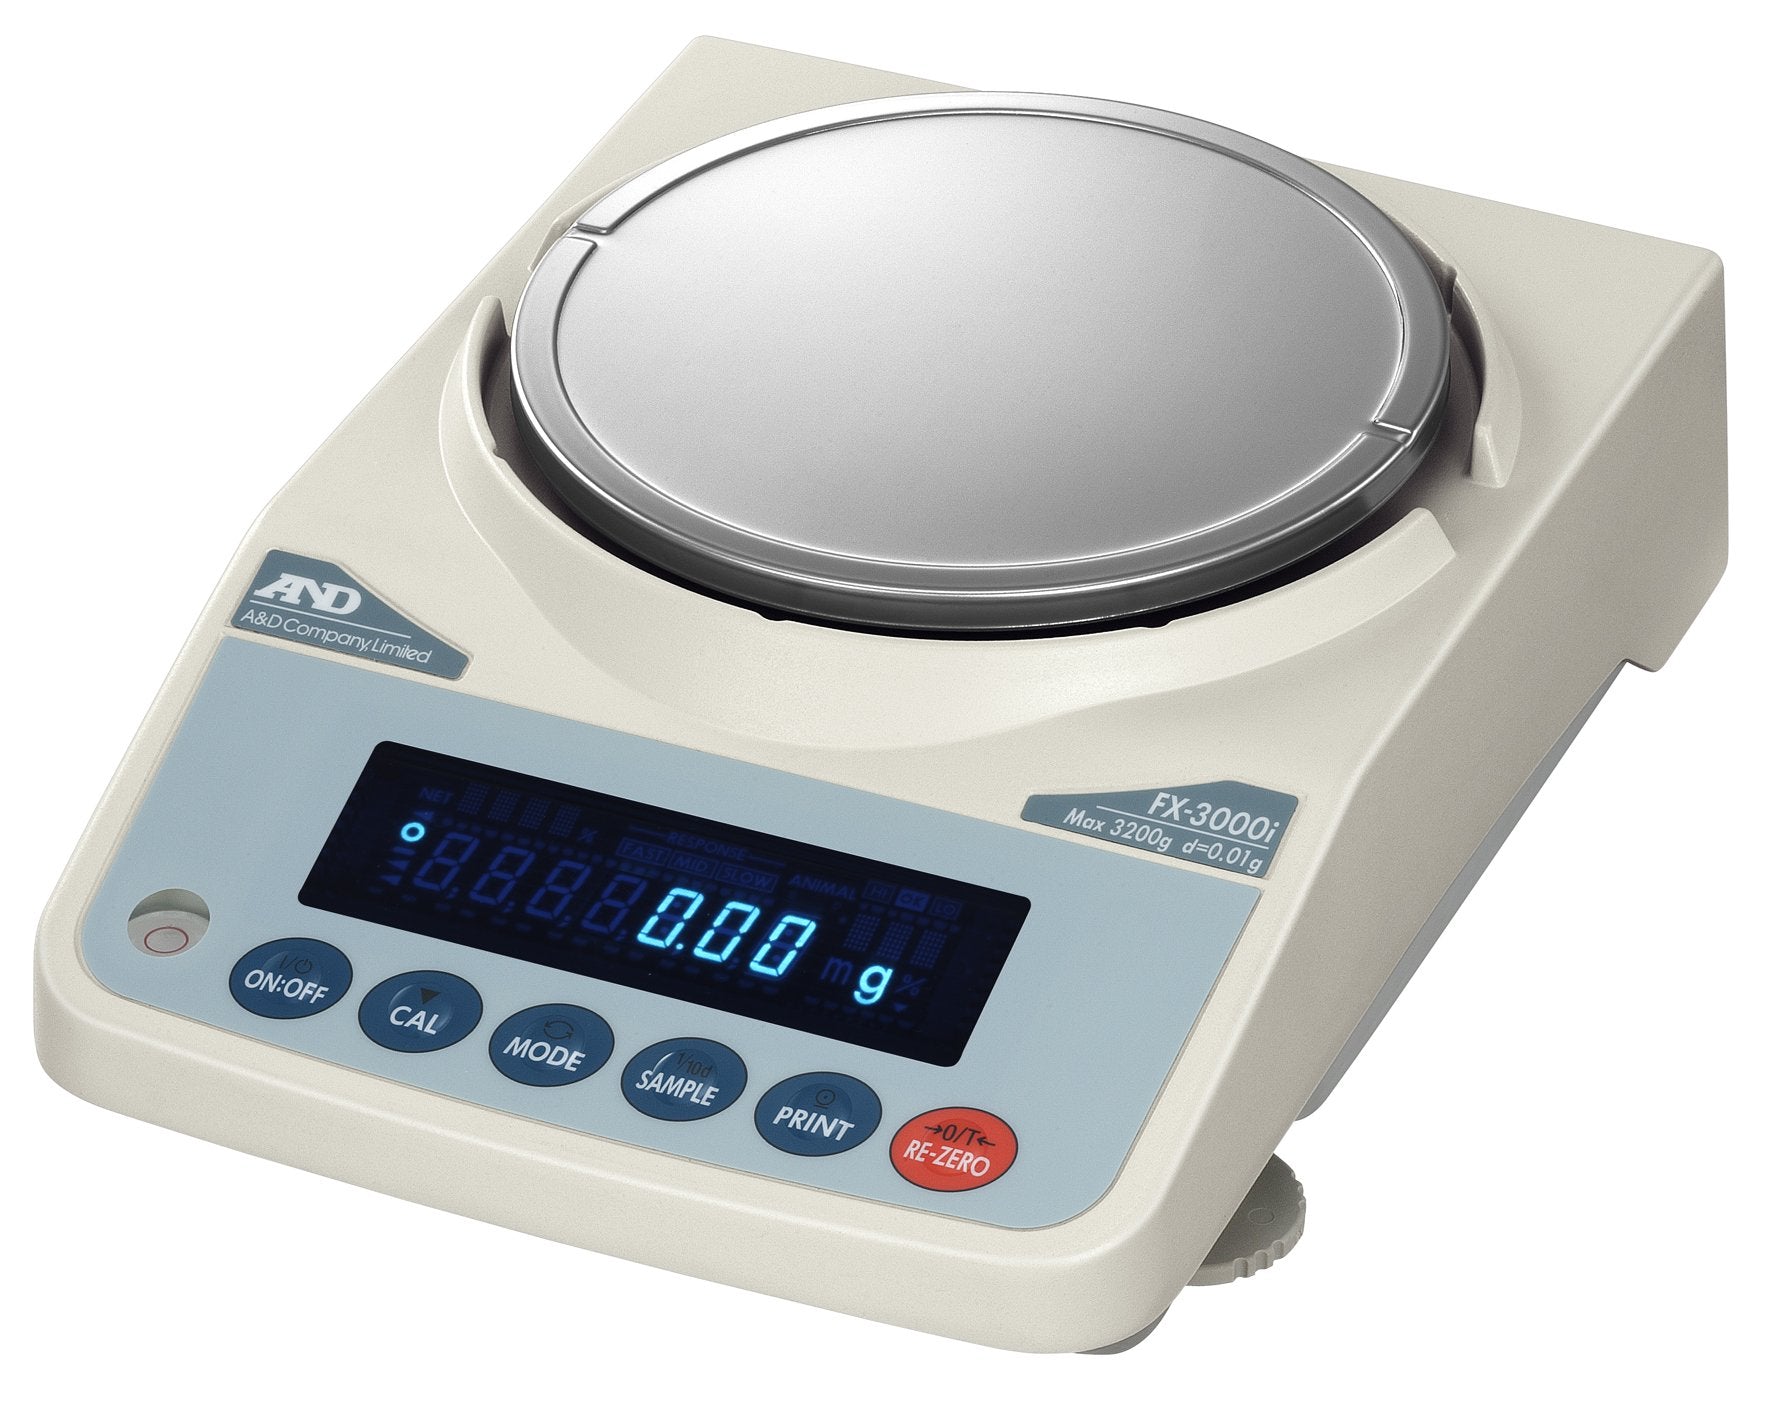 AND Weighing FX-3000iNC Precision Balance